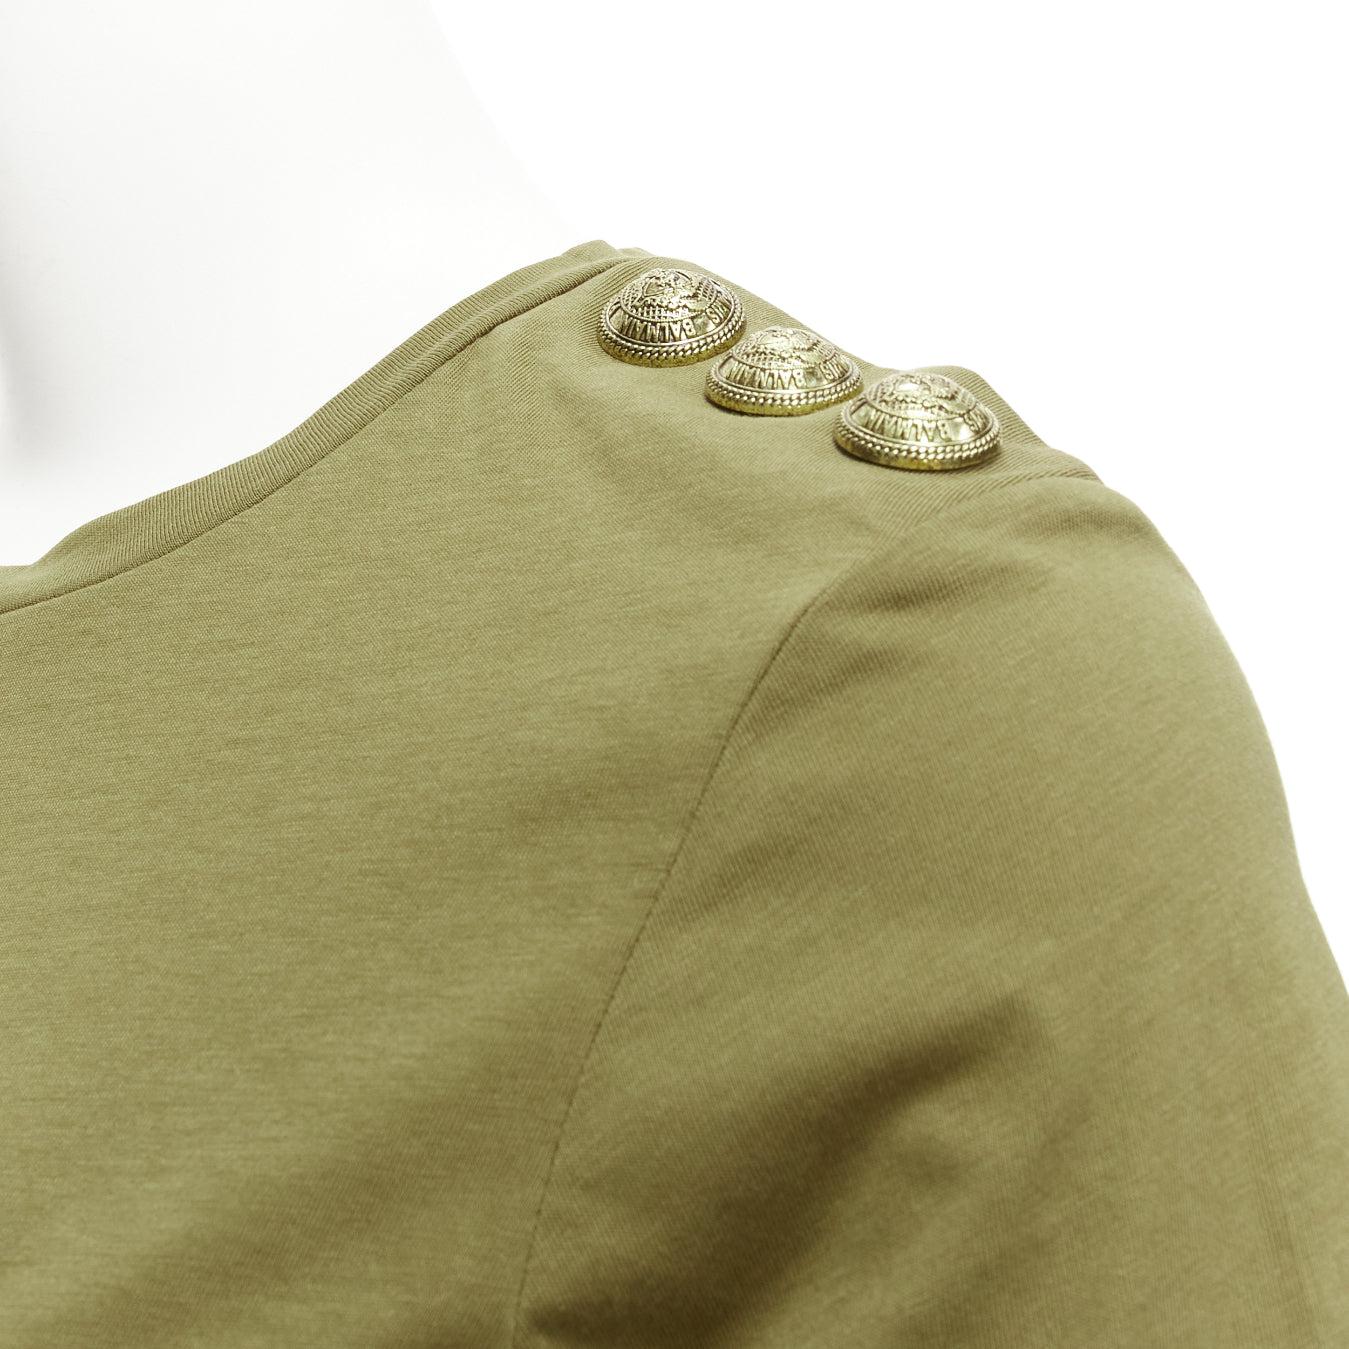 BALMAIN green brown distressed logo military buttons tshirt XS
Reference: AAWC/A00765
Brand: Balmain
Designer: Olivier Rousteing
Material: Cotton
Color: Green, Gold
Pattern: Solid
Closure: Slip On
Extra Details: Buttons are decorative.
Made in: